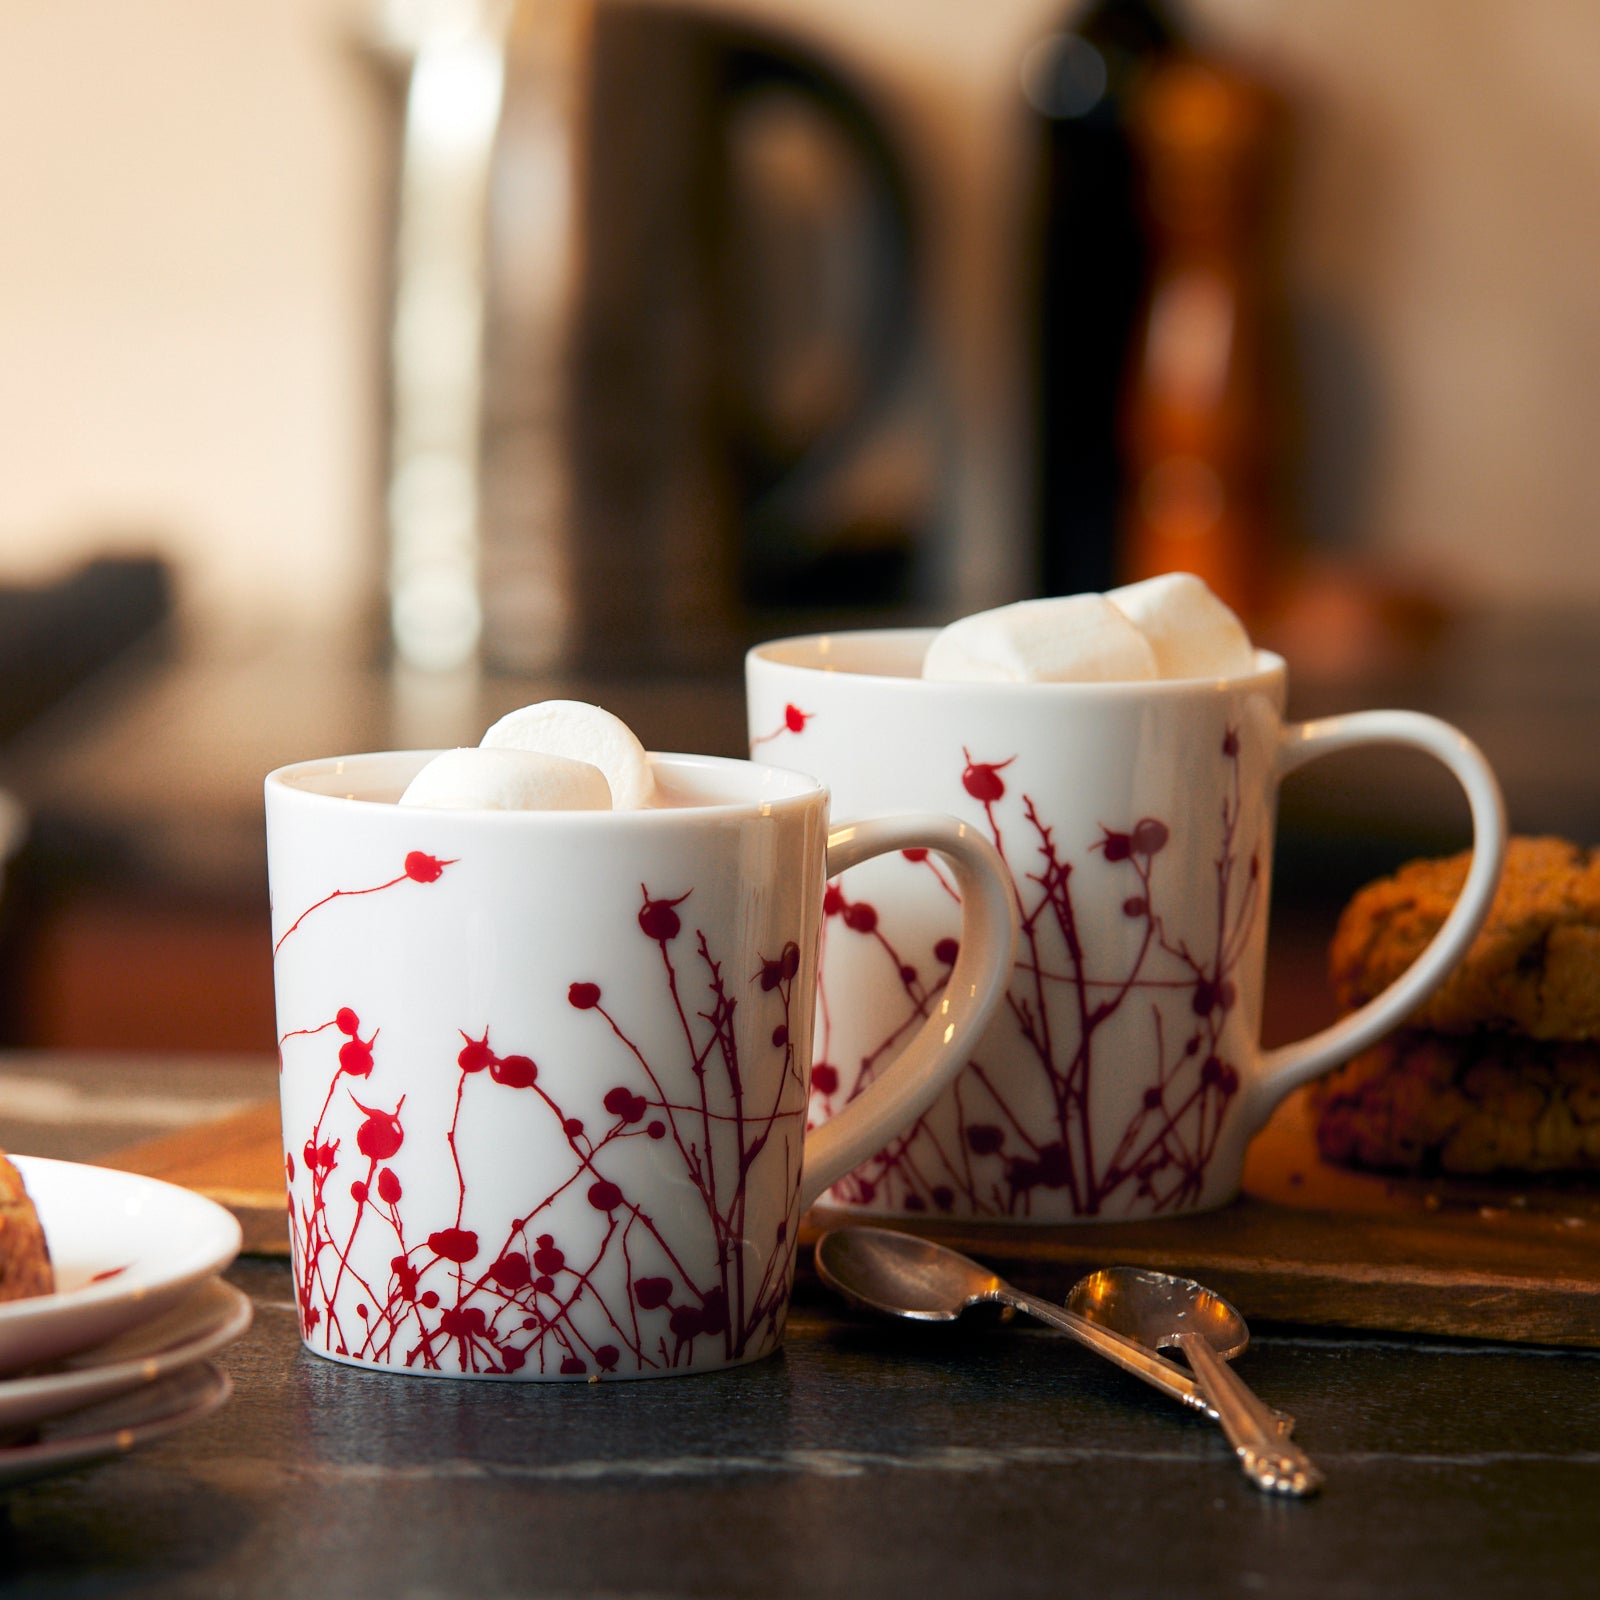 A generously sized, creamy white porcelain Winterberries Mug with a handle, featuring a red silhouette design of winter berries and branches by Caskata Artisanal Home.